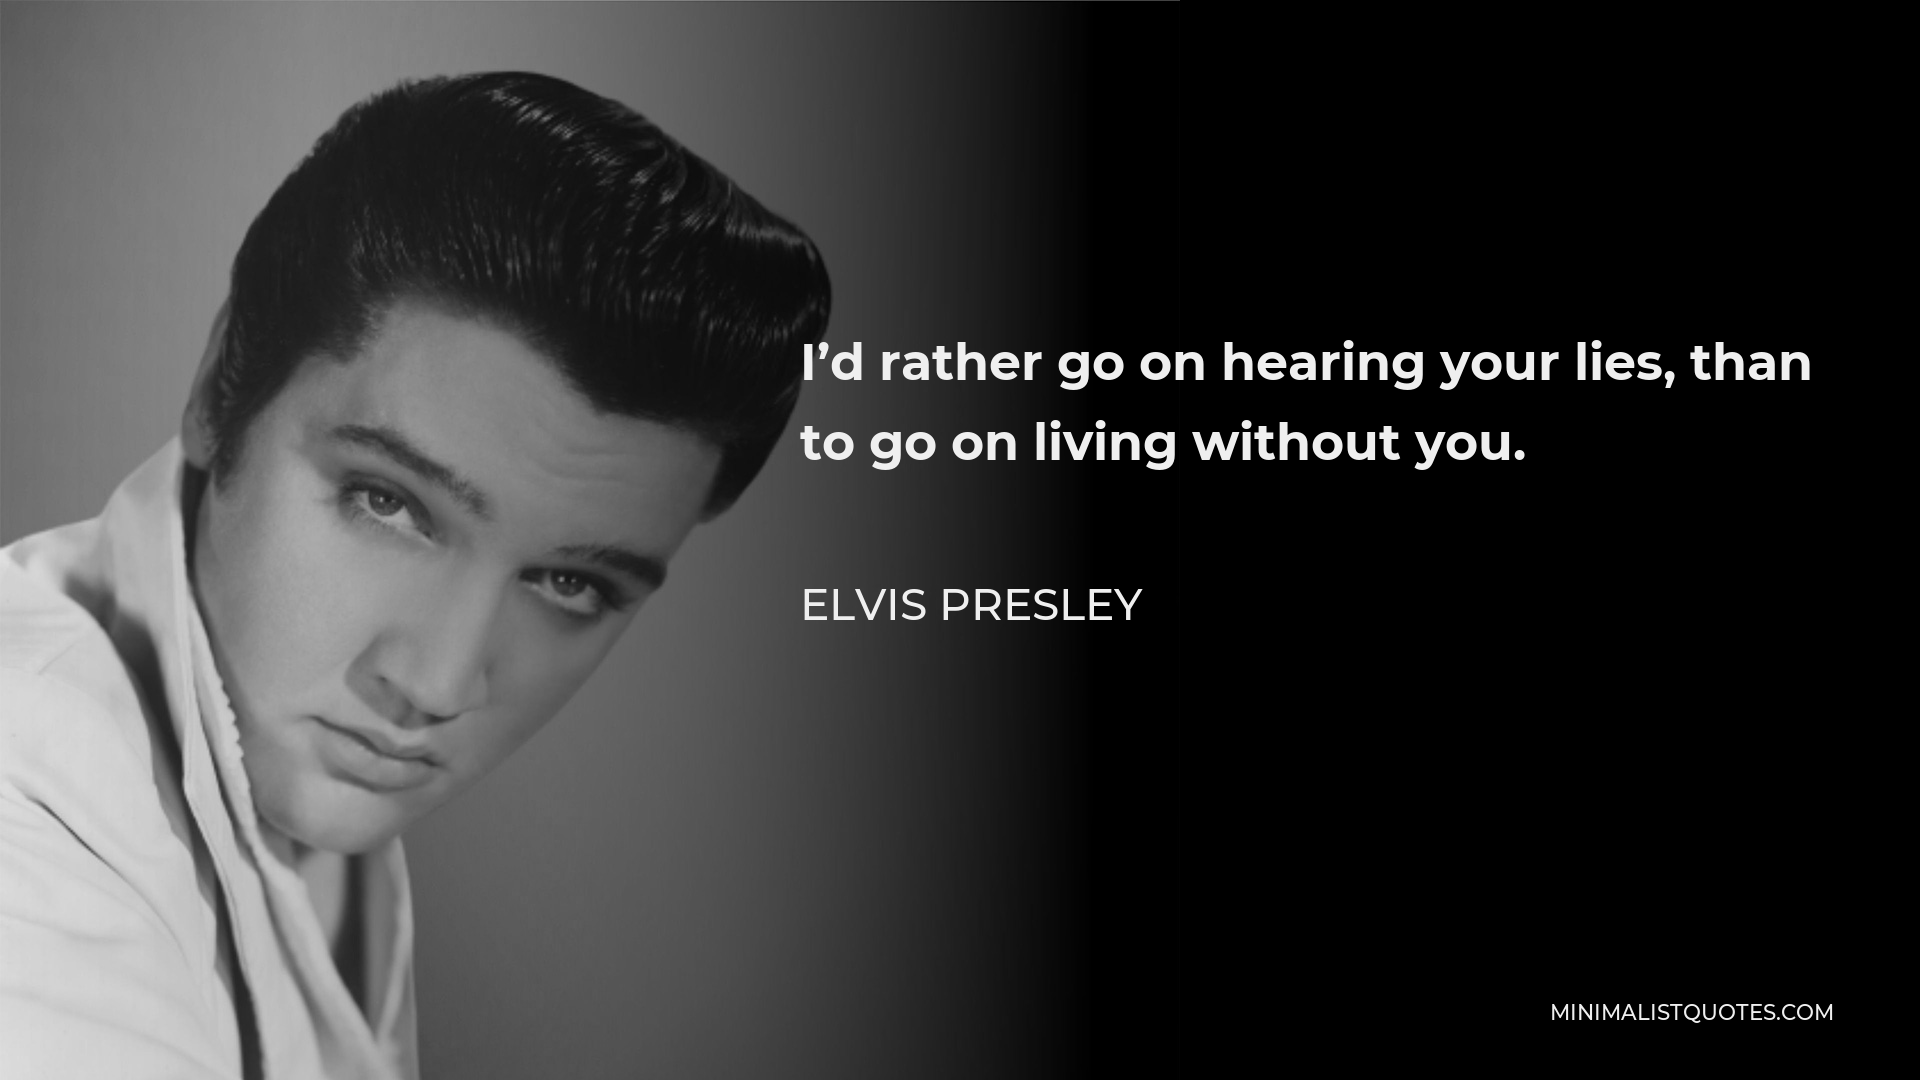 Elvis Presley Quote - I’d rather go on hearing your lies, than to go on living without you.